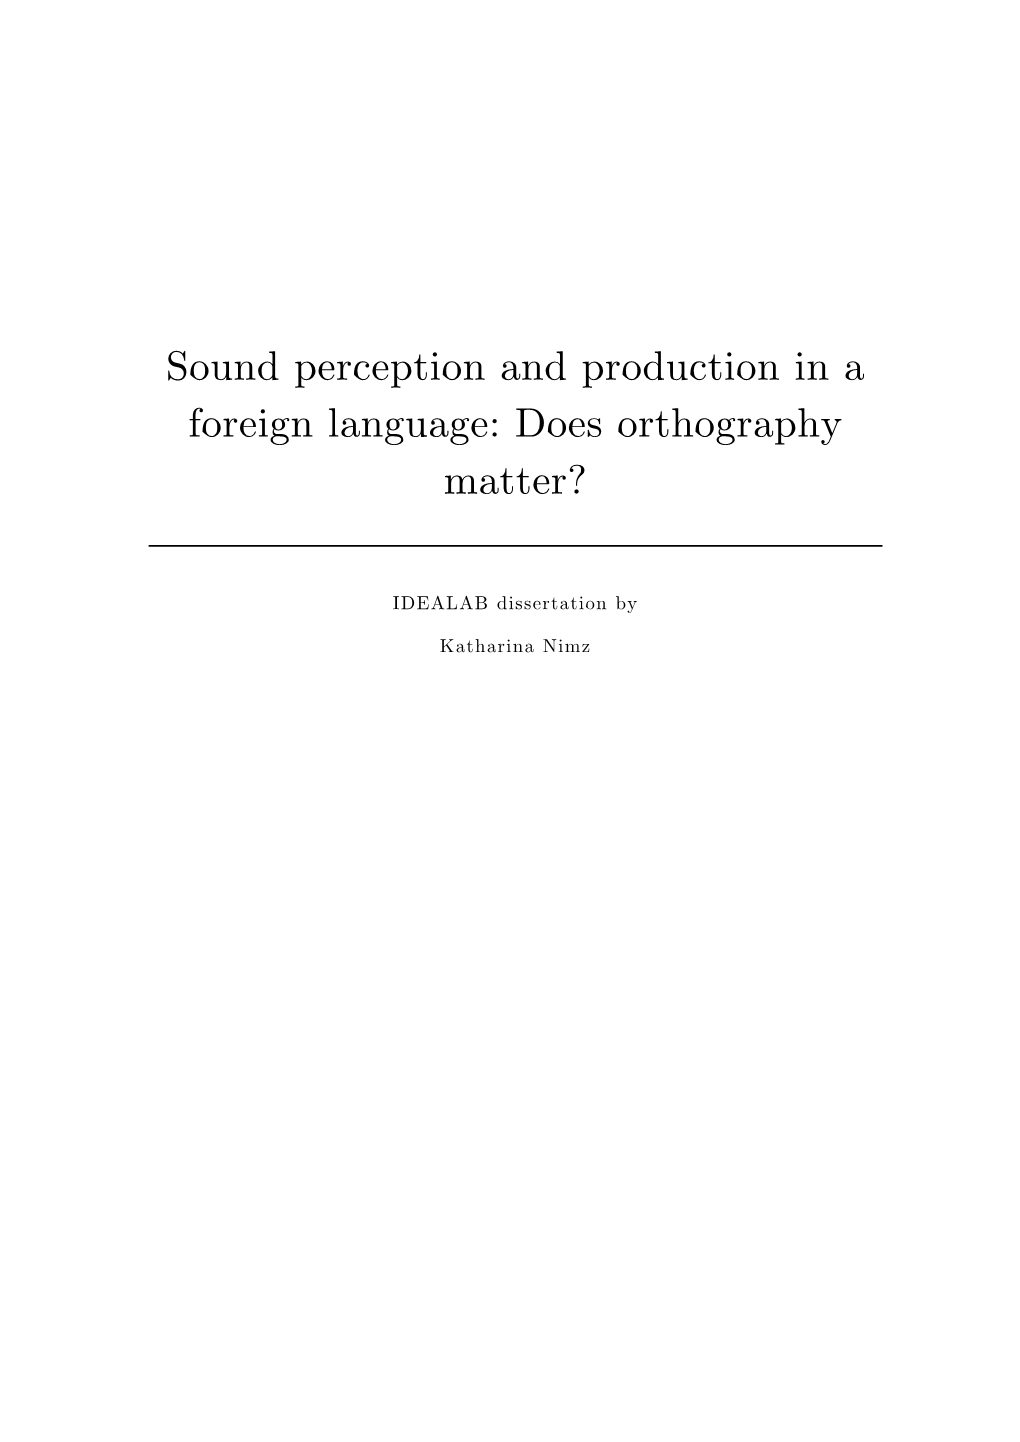 Sound Perception and Production in a Foreign Language: Does Orthography Matter?